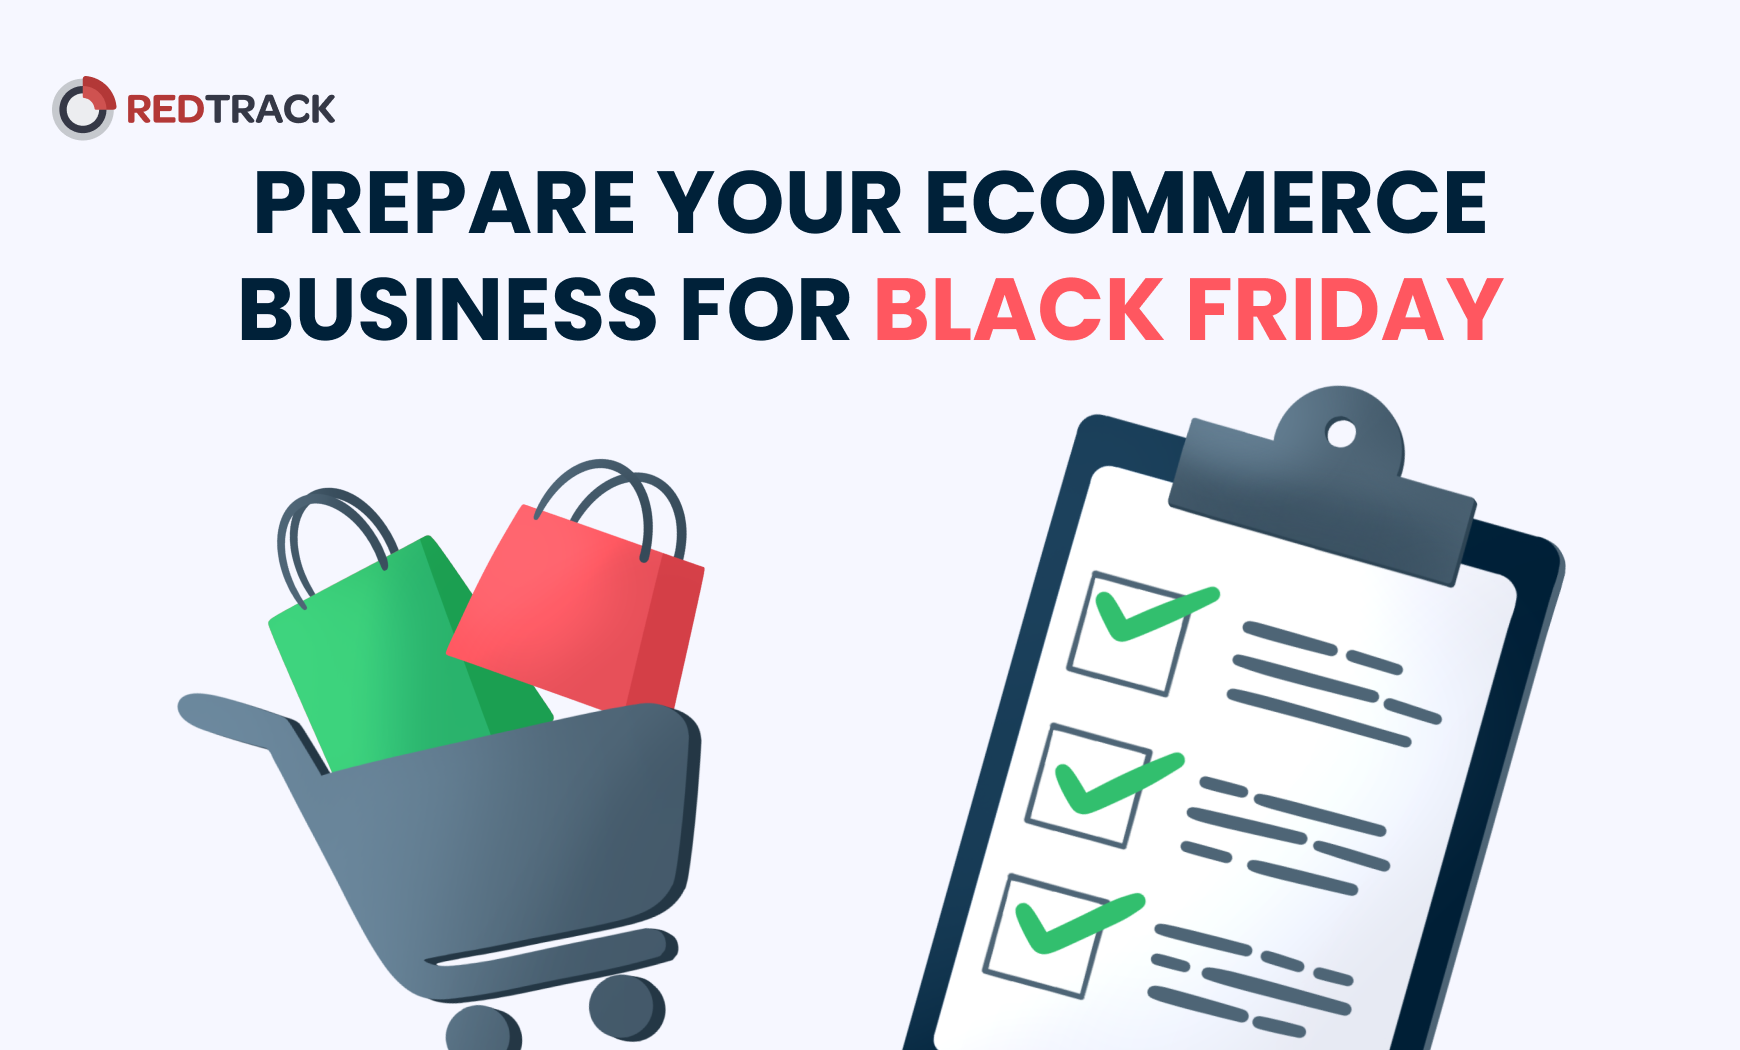 https://redtrack.io/blog/wp-content/uploads/2022/10/prepare-your-ecommerce-business-for-black-friday.png